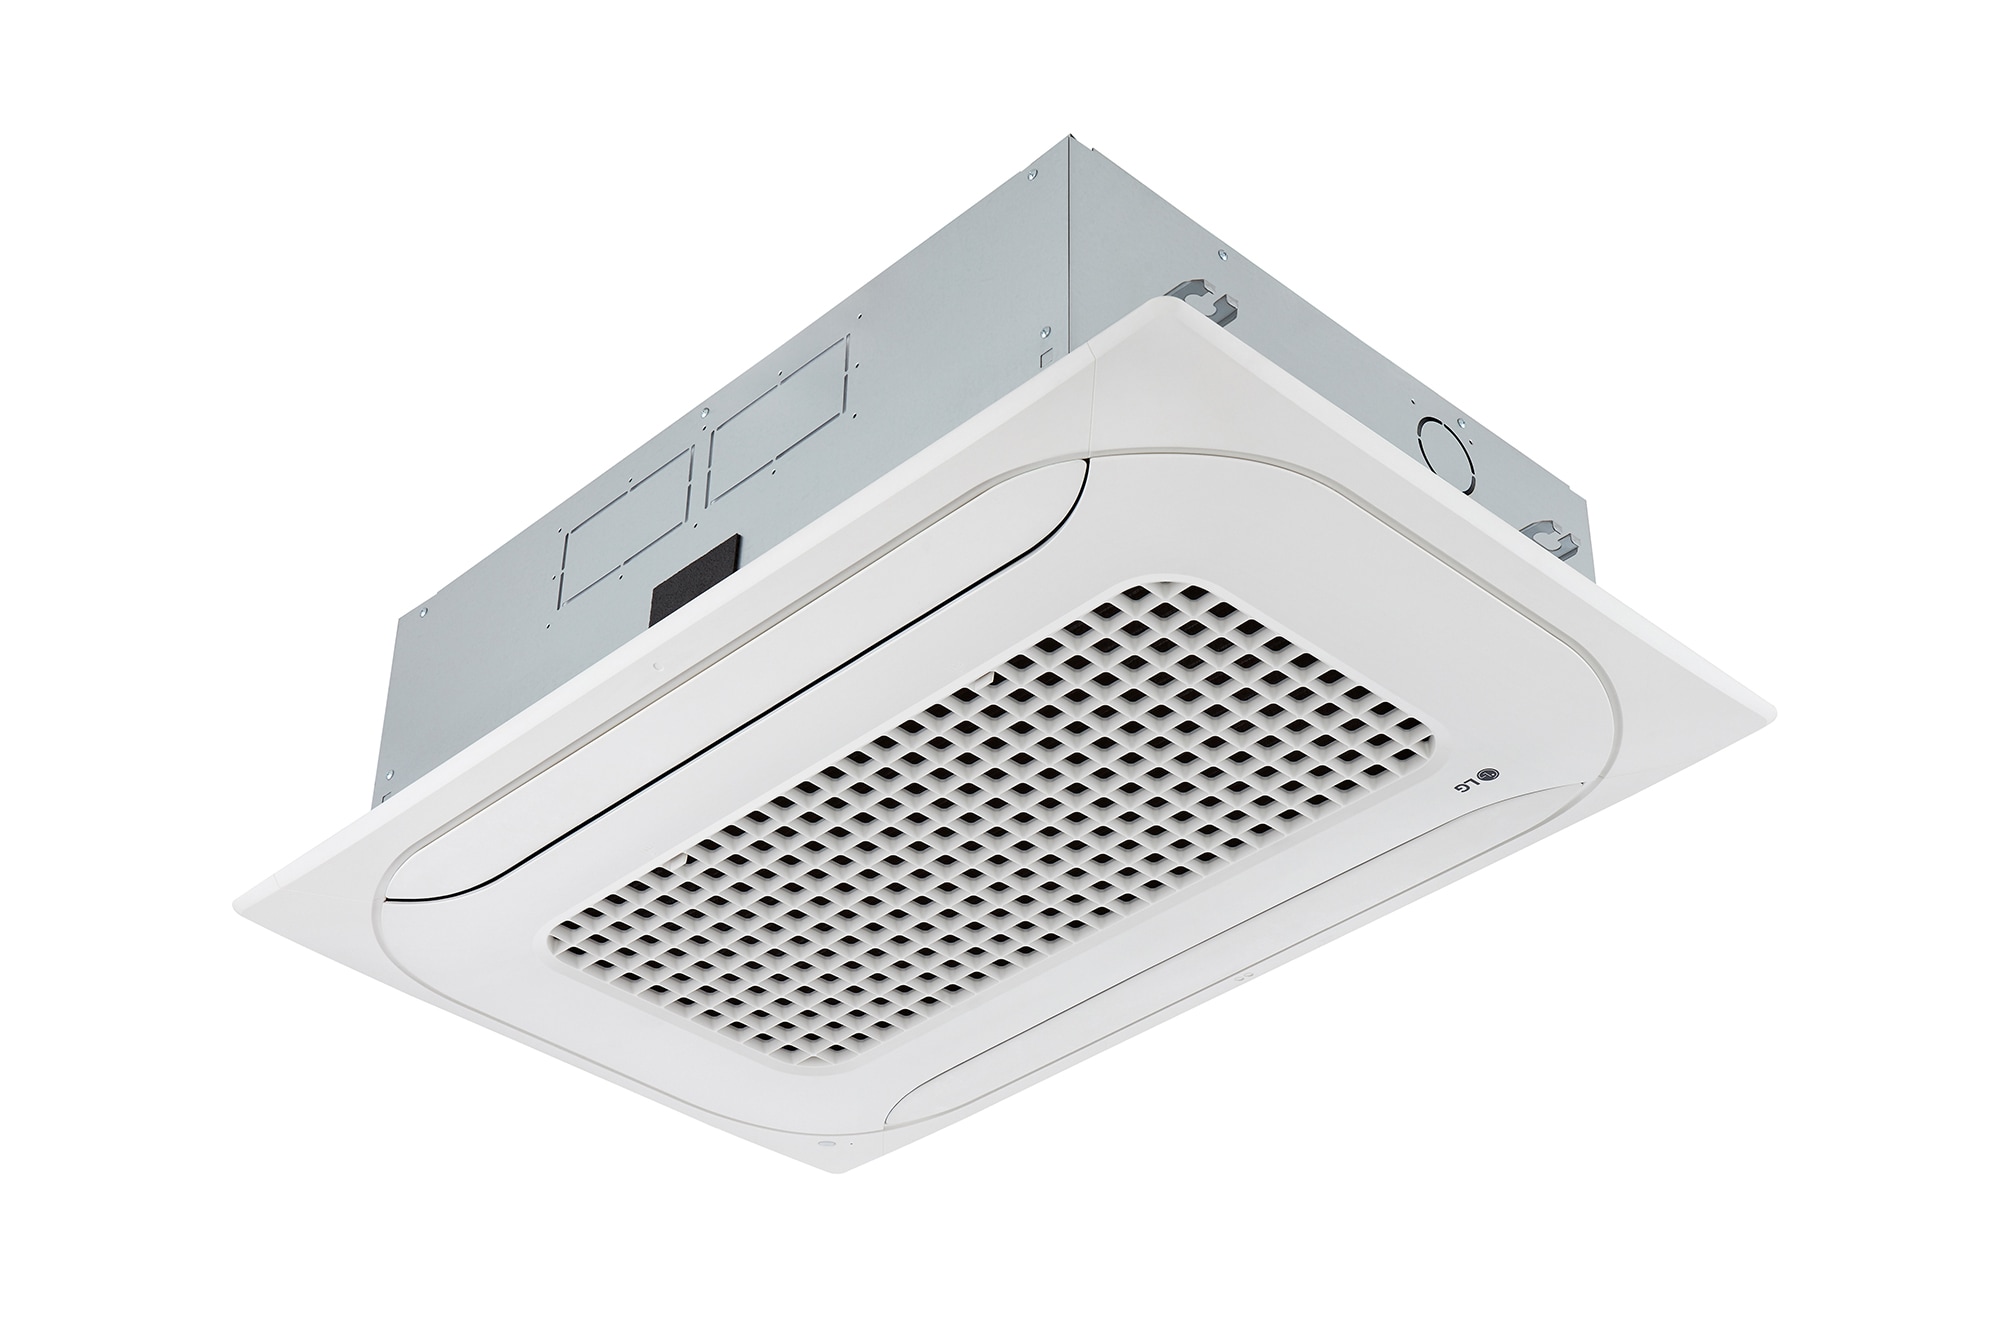 LG 2 way Ceiling AC with 5.6KW Cooling Capacity, ARNU18GTSC4